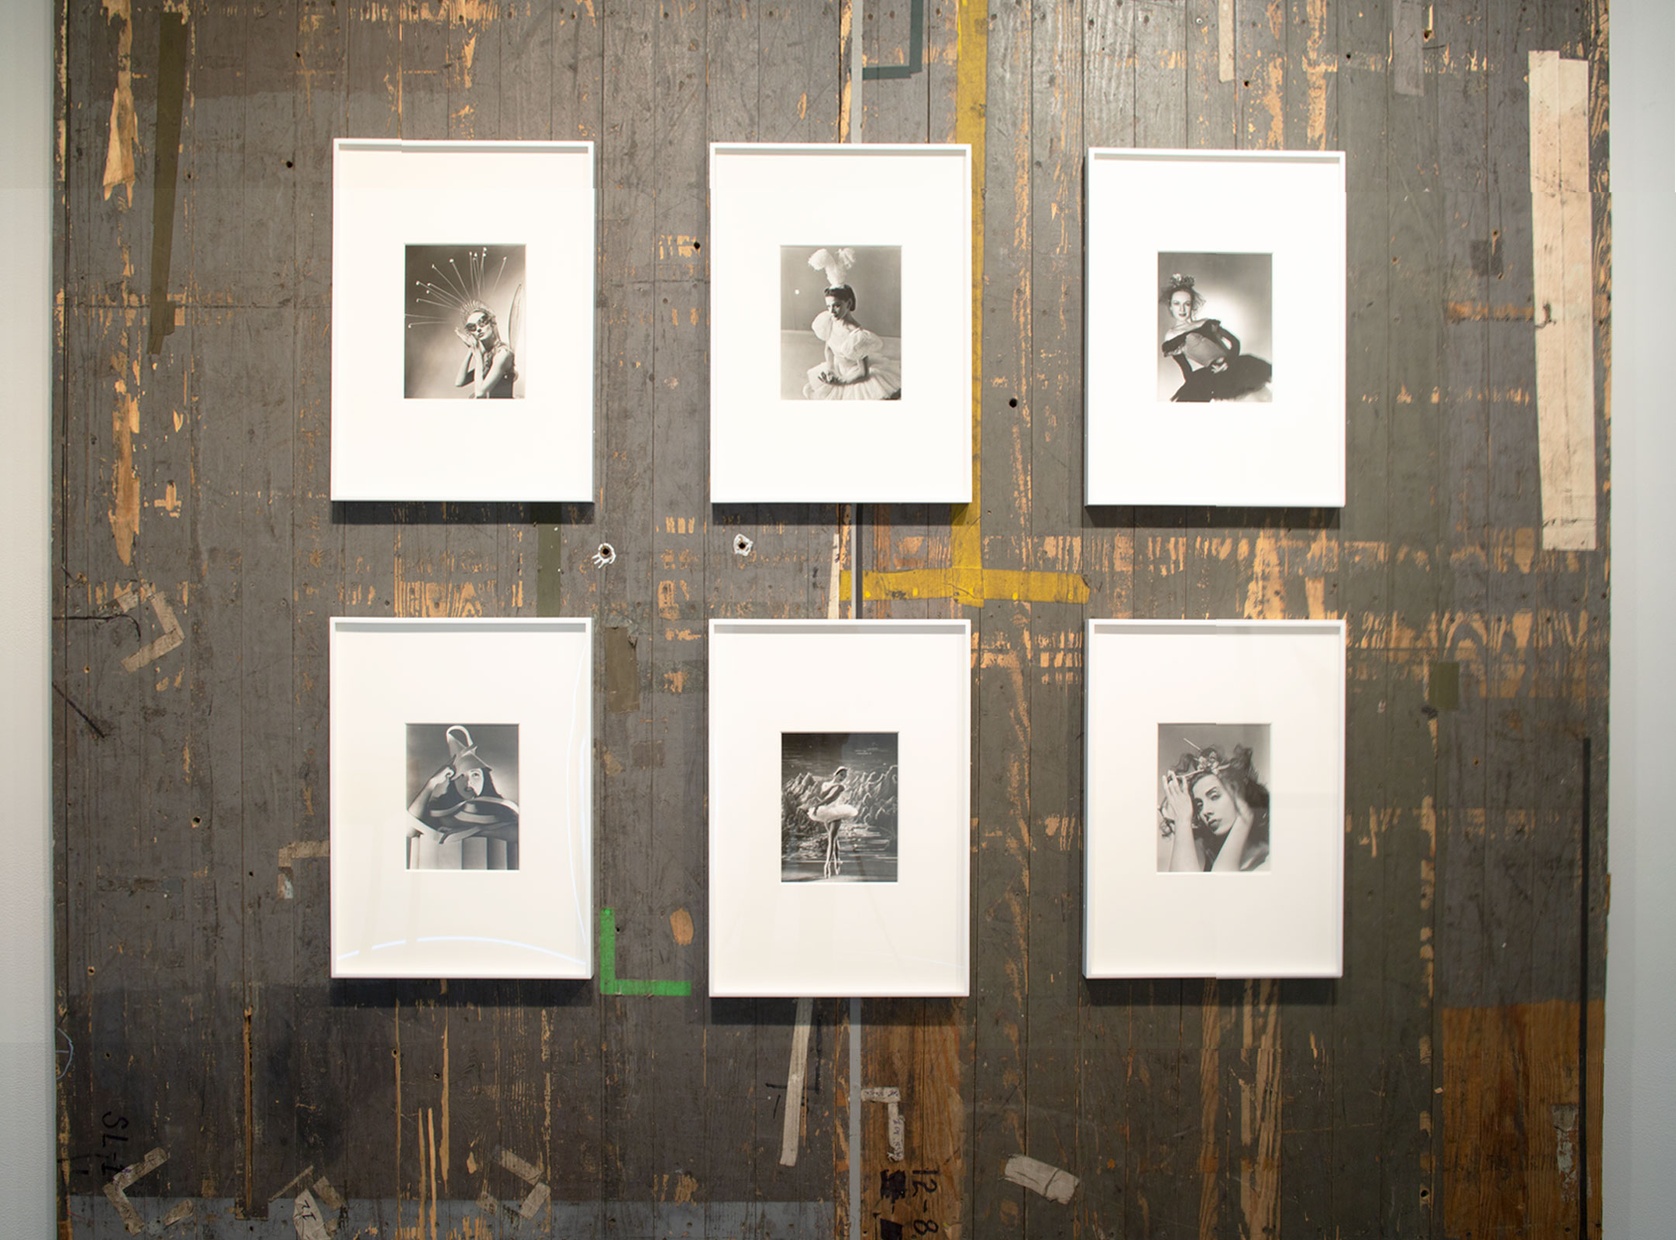 Six black and white photographs framed in white hang on a beaten up grey-brown hardwood floor, which also is adorned with tape and markings, presumably for dancers to mark their spots.